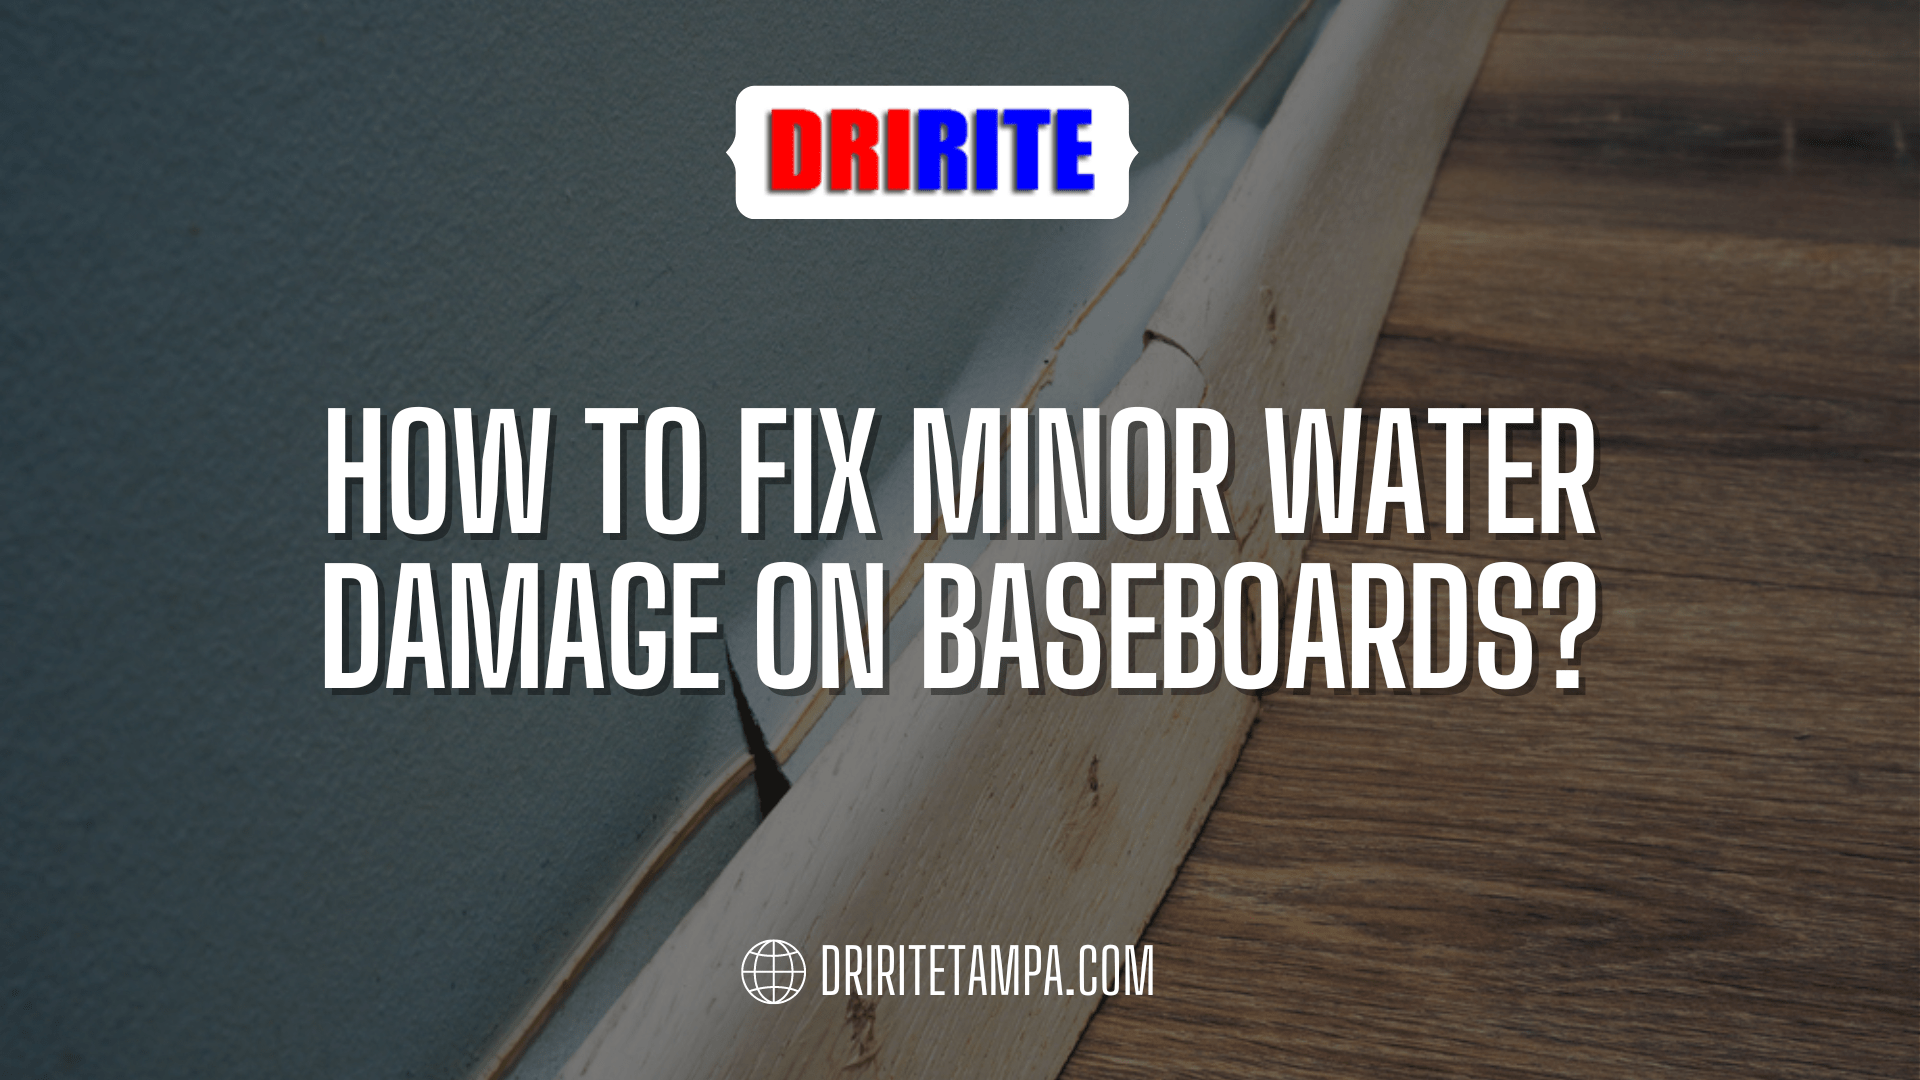 How to Fix Minor Water Damage on Baseboards?